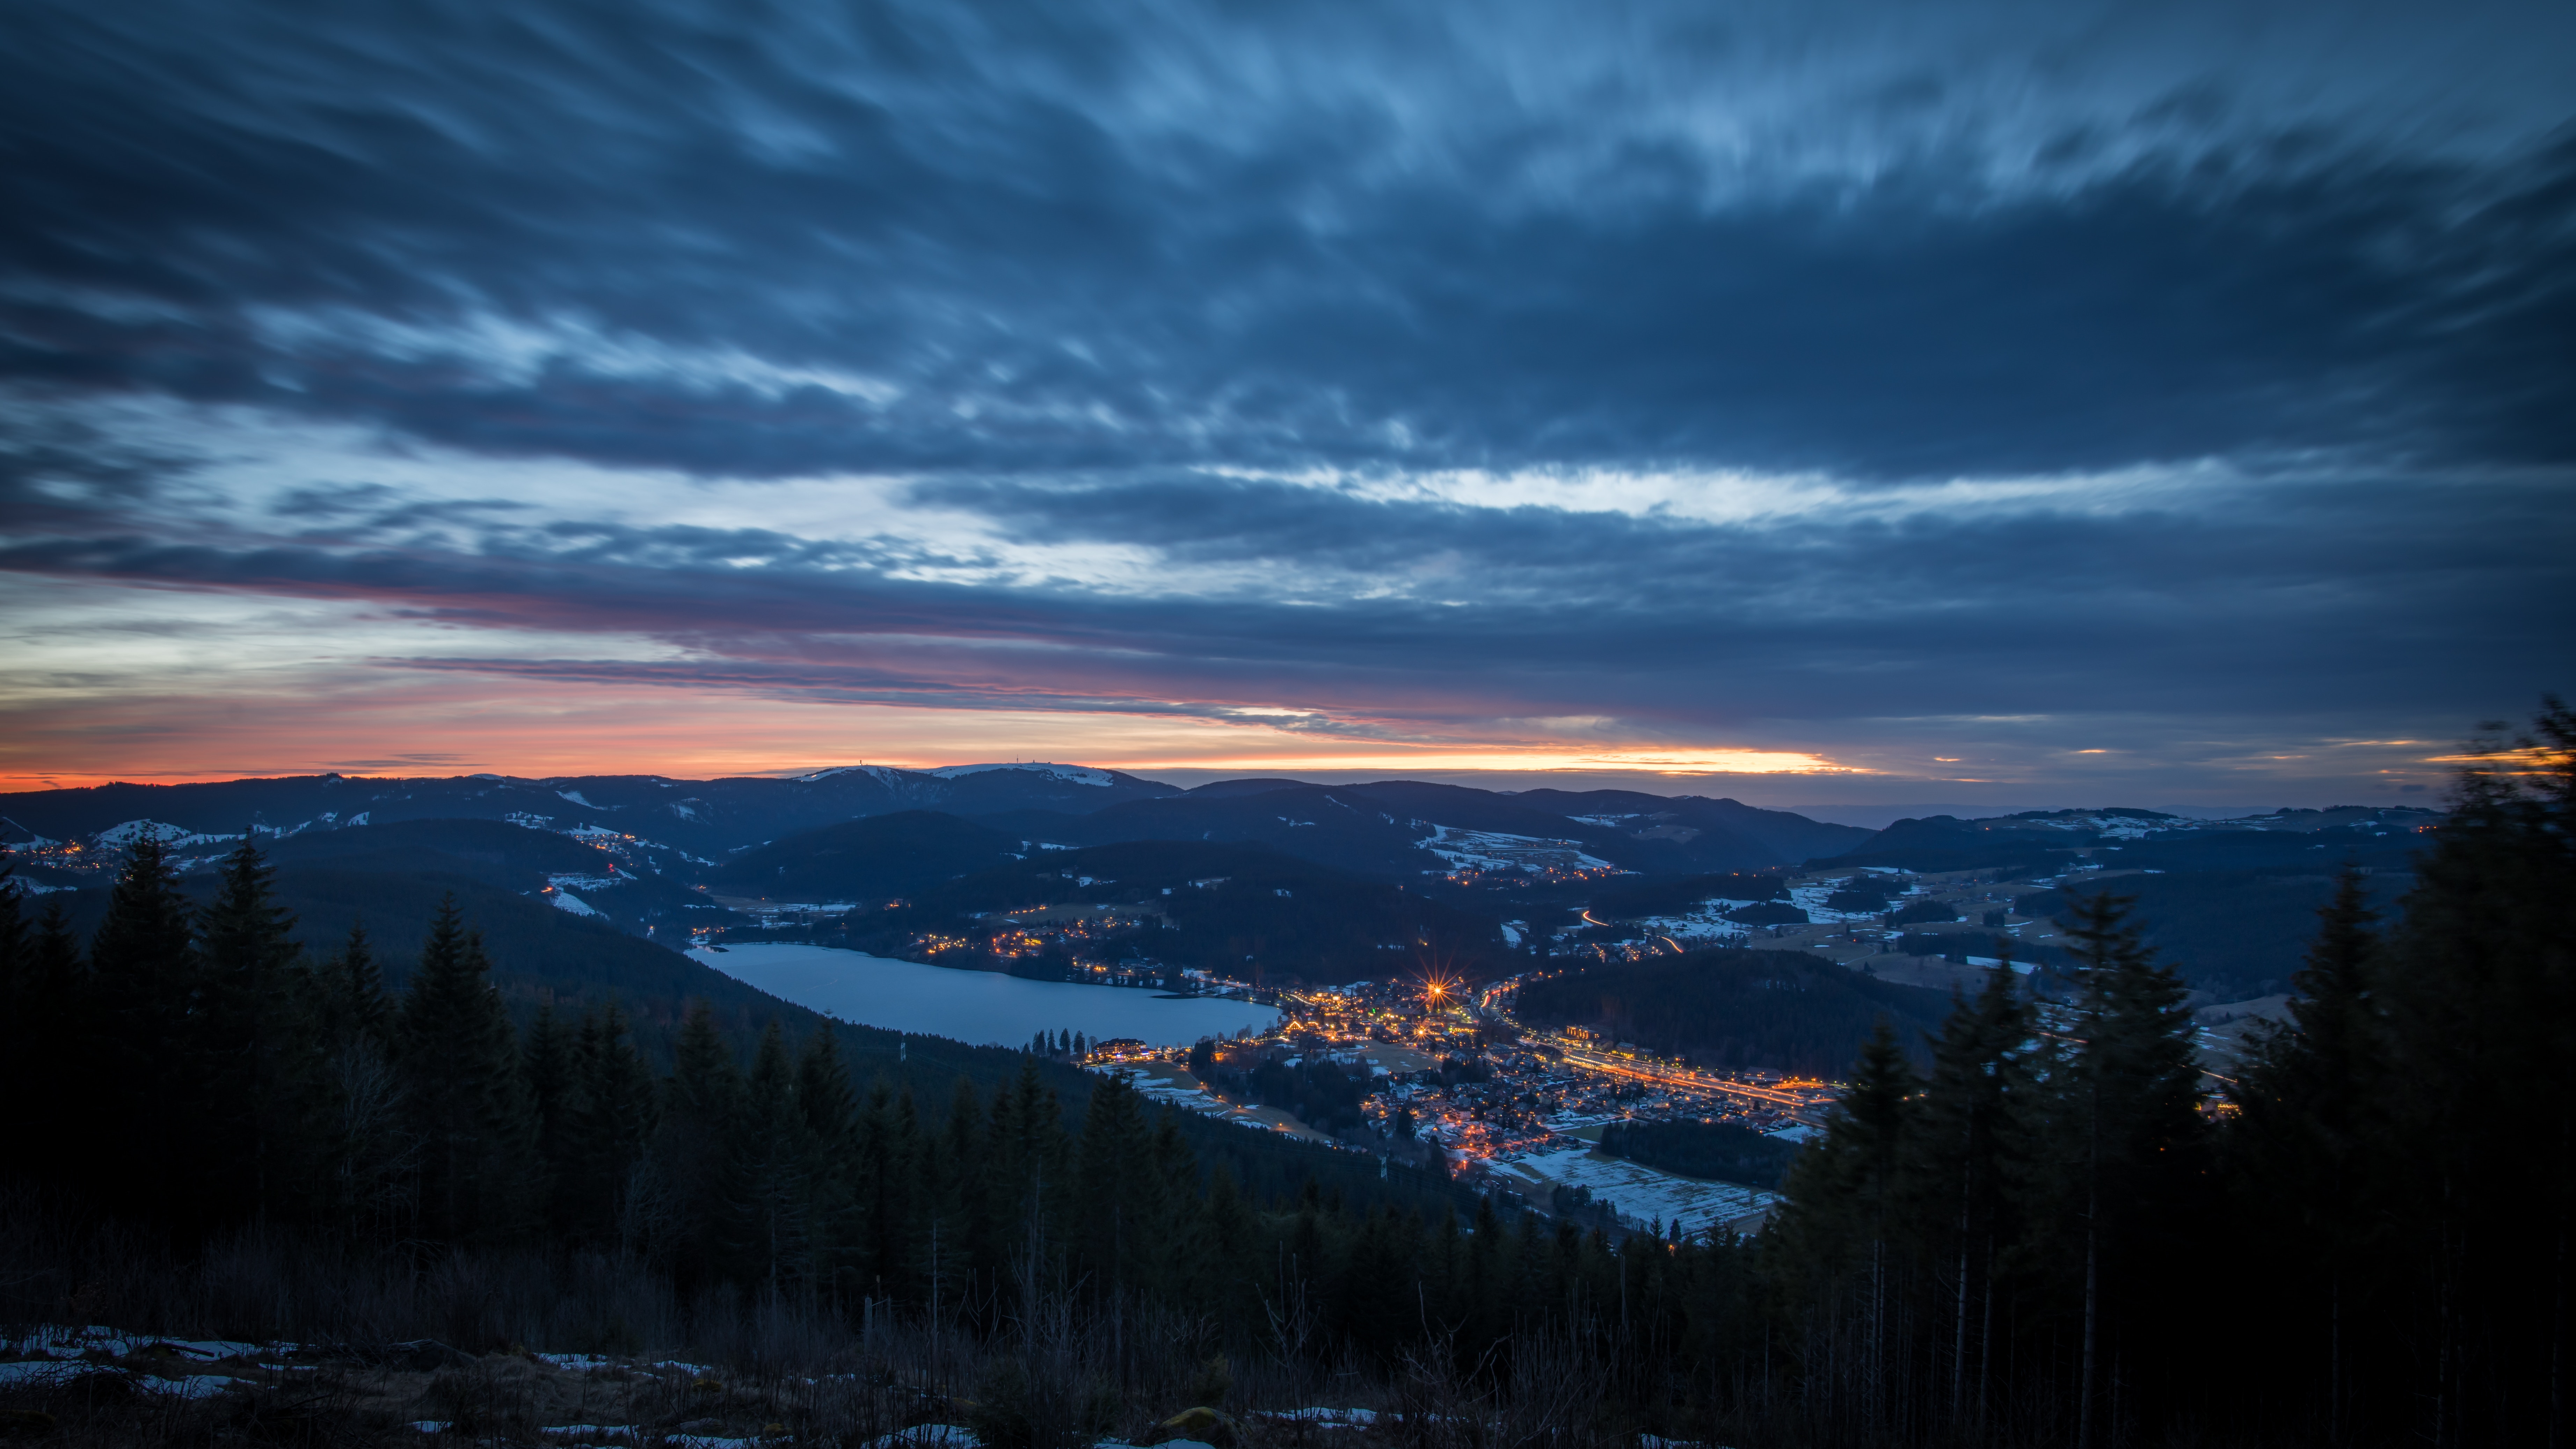 mountains, landscape, nature, night, twilight, city, view from above, dusk